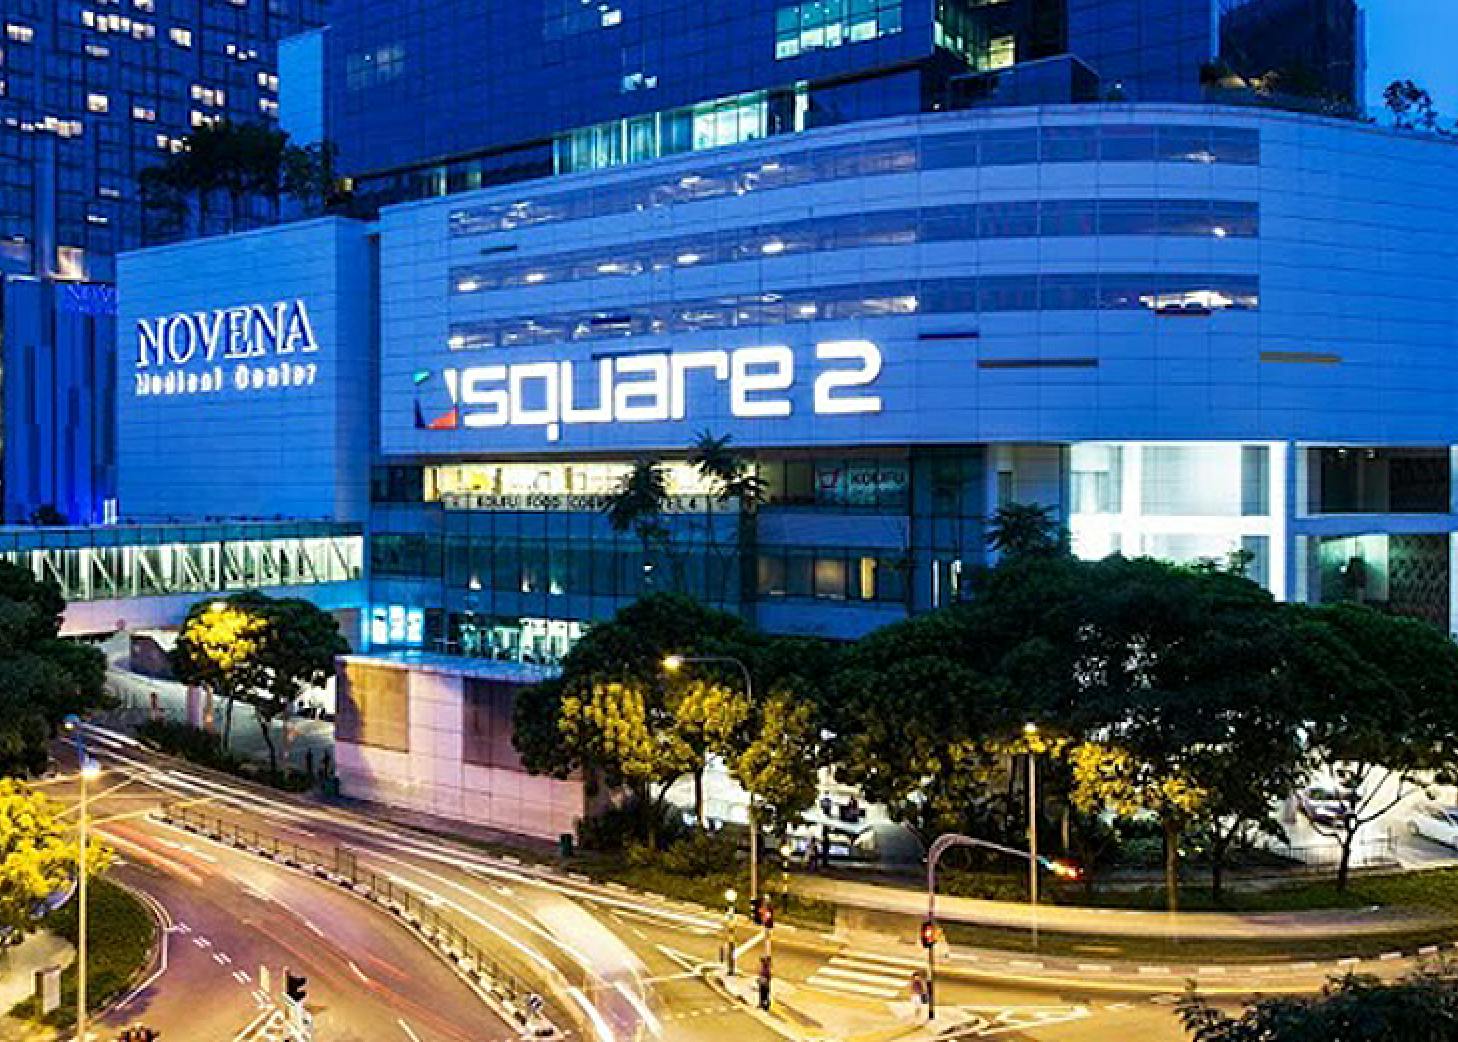 Square 2 Shopping Mall